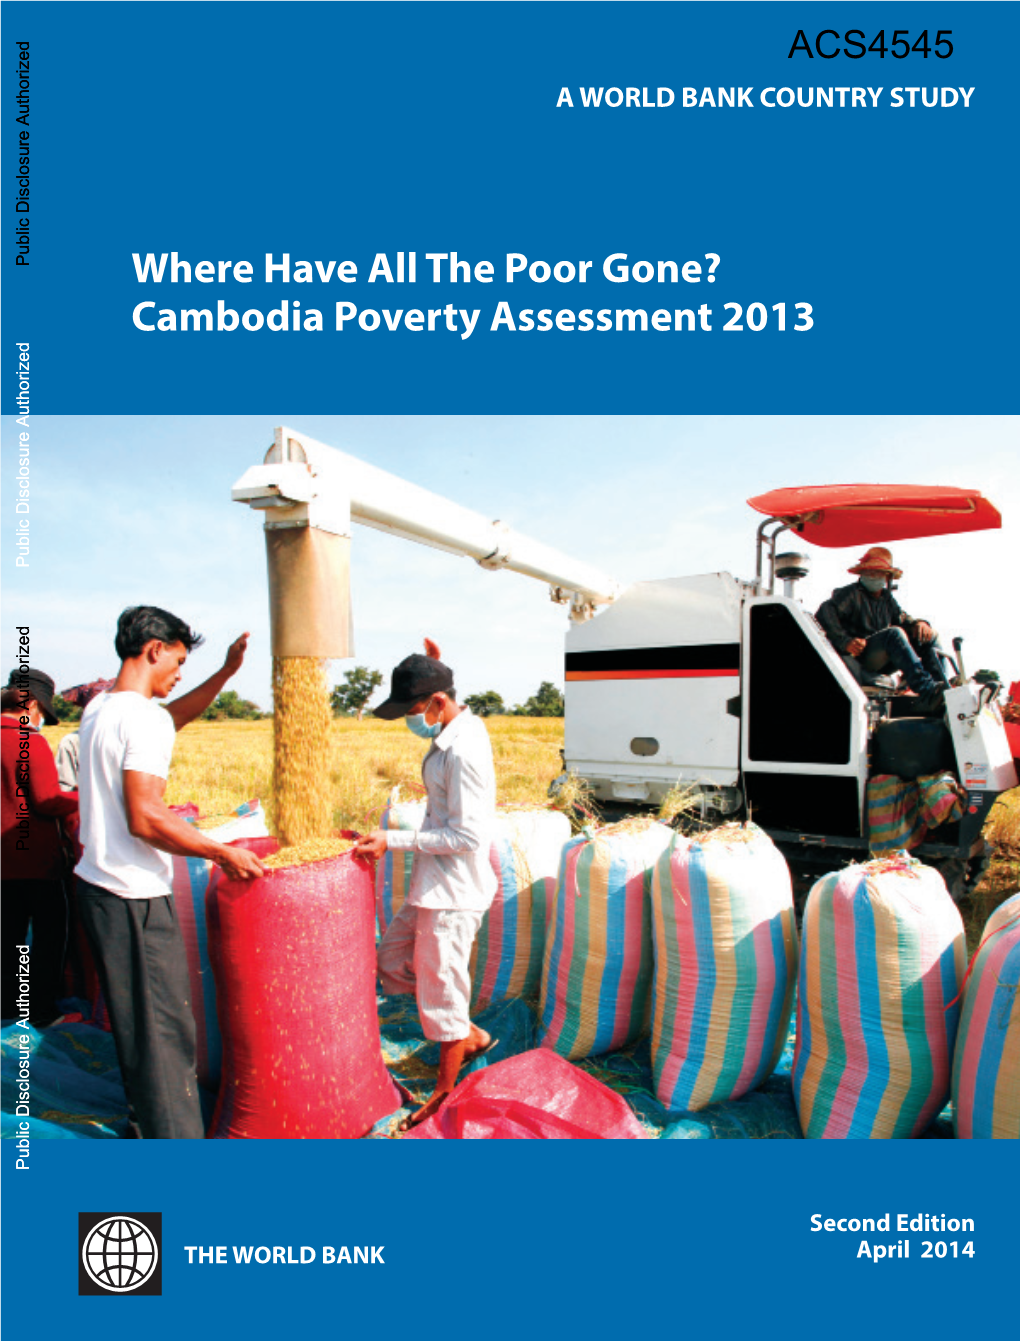 Where Have All the Poor Gone? Cambodia Poverty Assessment 2013 Public Disclosure Authorized Public Disclosure Authorized Public Disclosure Authorized